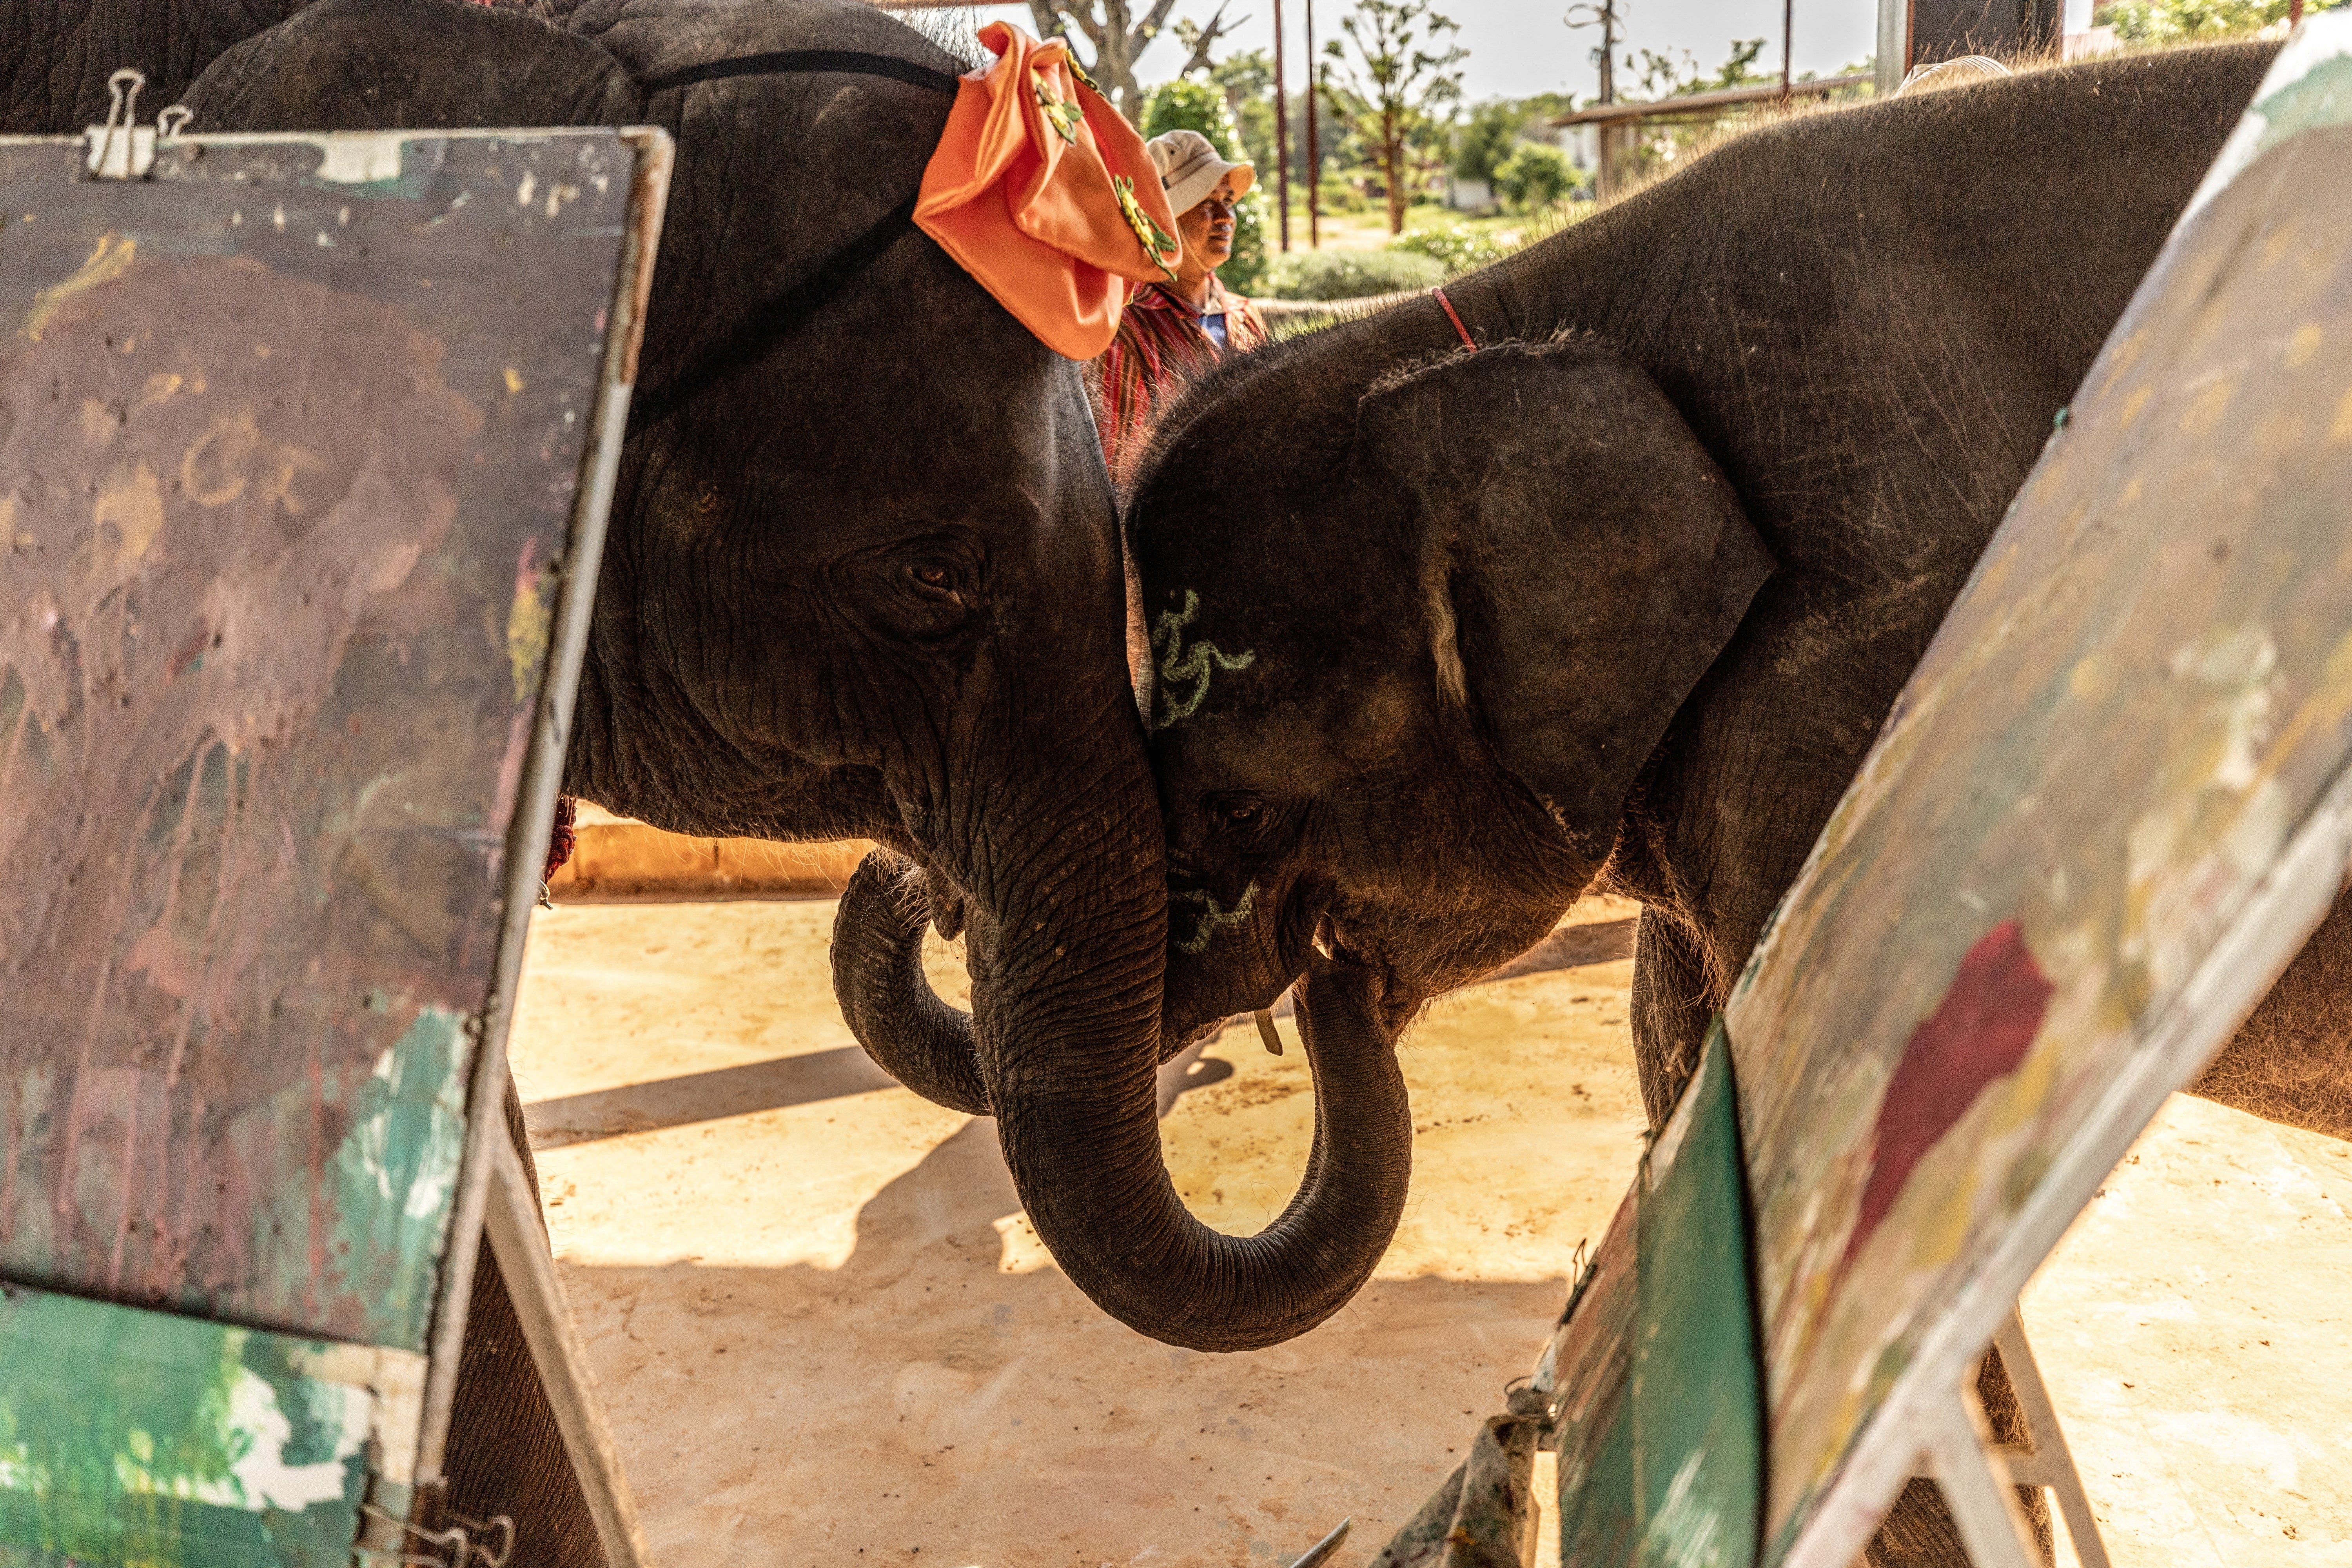 Two elephants touch each other after performing in a painting show for local tourists